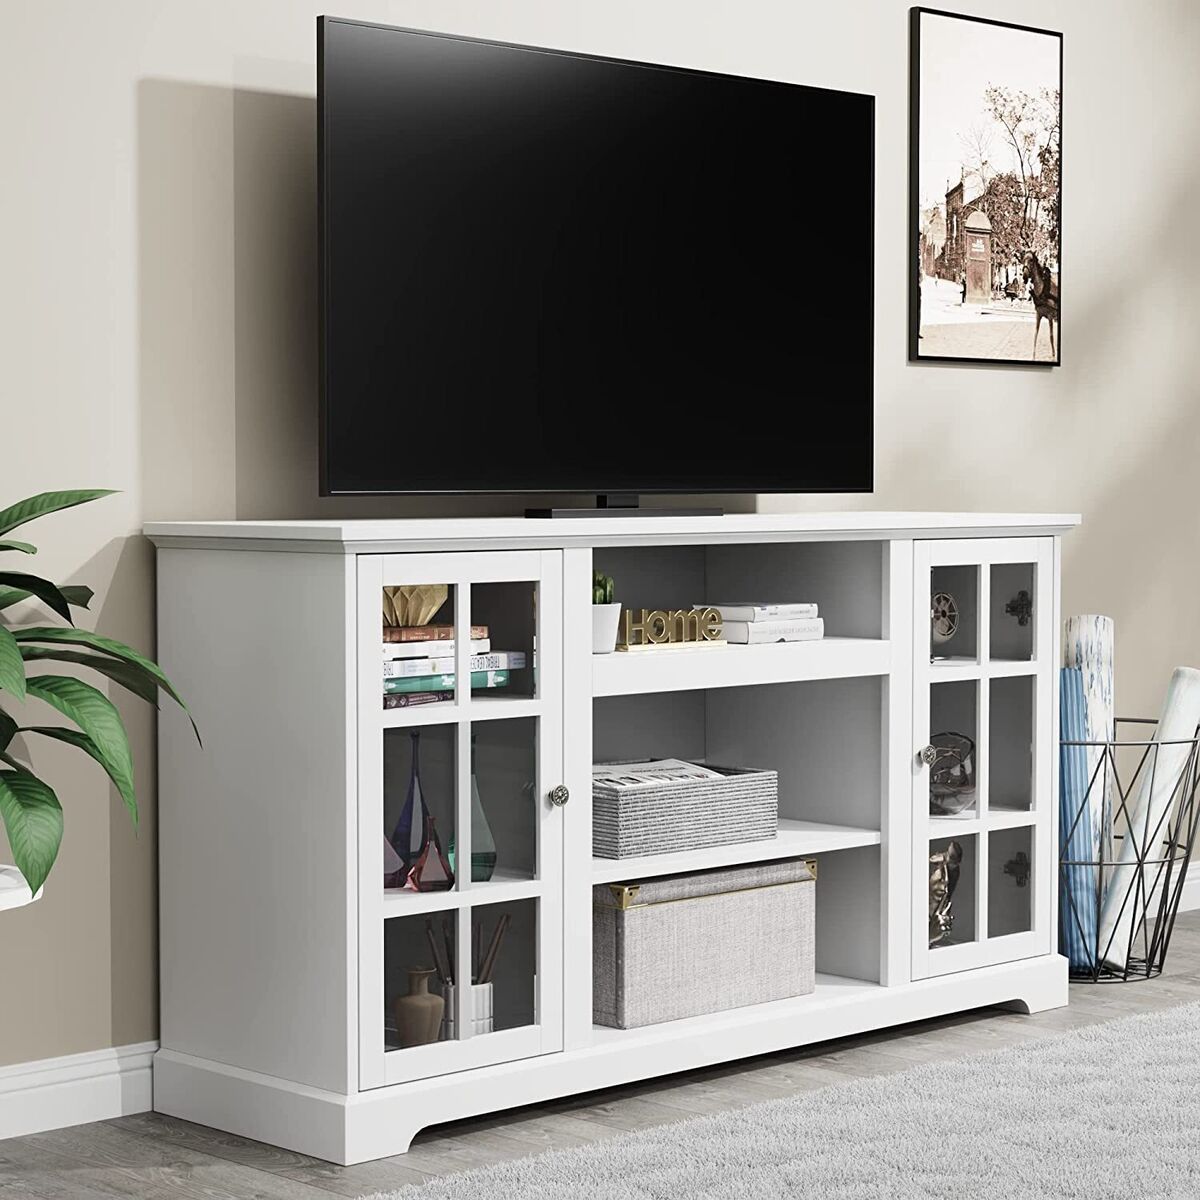 Modern Farmhouse Tv Stand For 65 Inch Tv Entertainment Center Storage  Cabinets | Ebay Throughout Farmhouse Stands With Shelves (View 3 of 15)